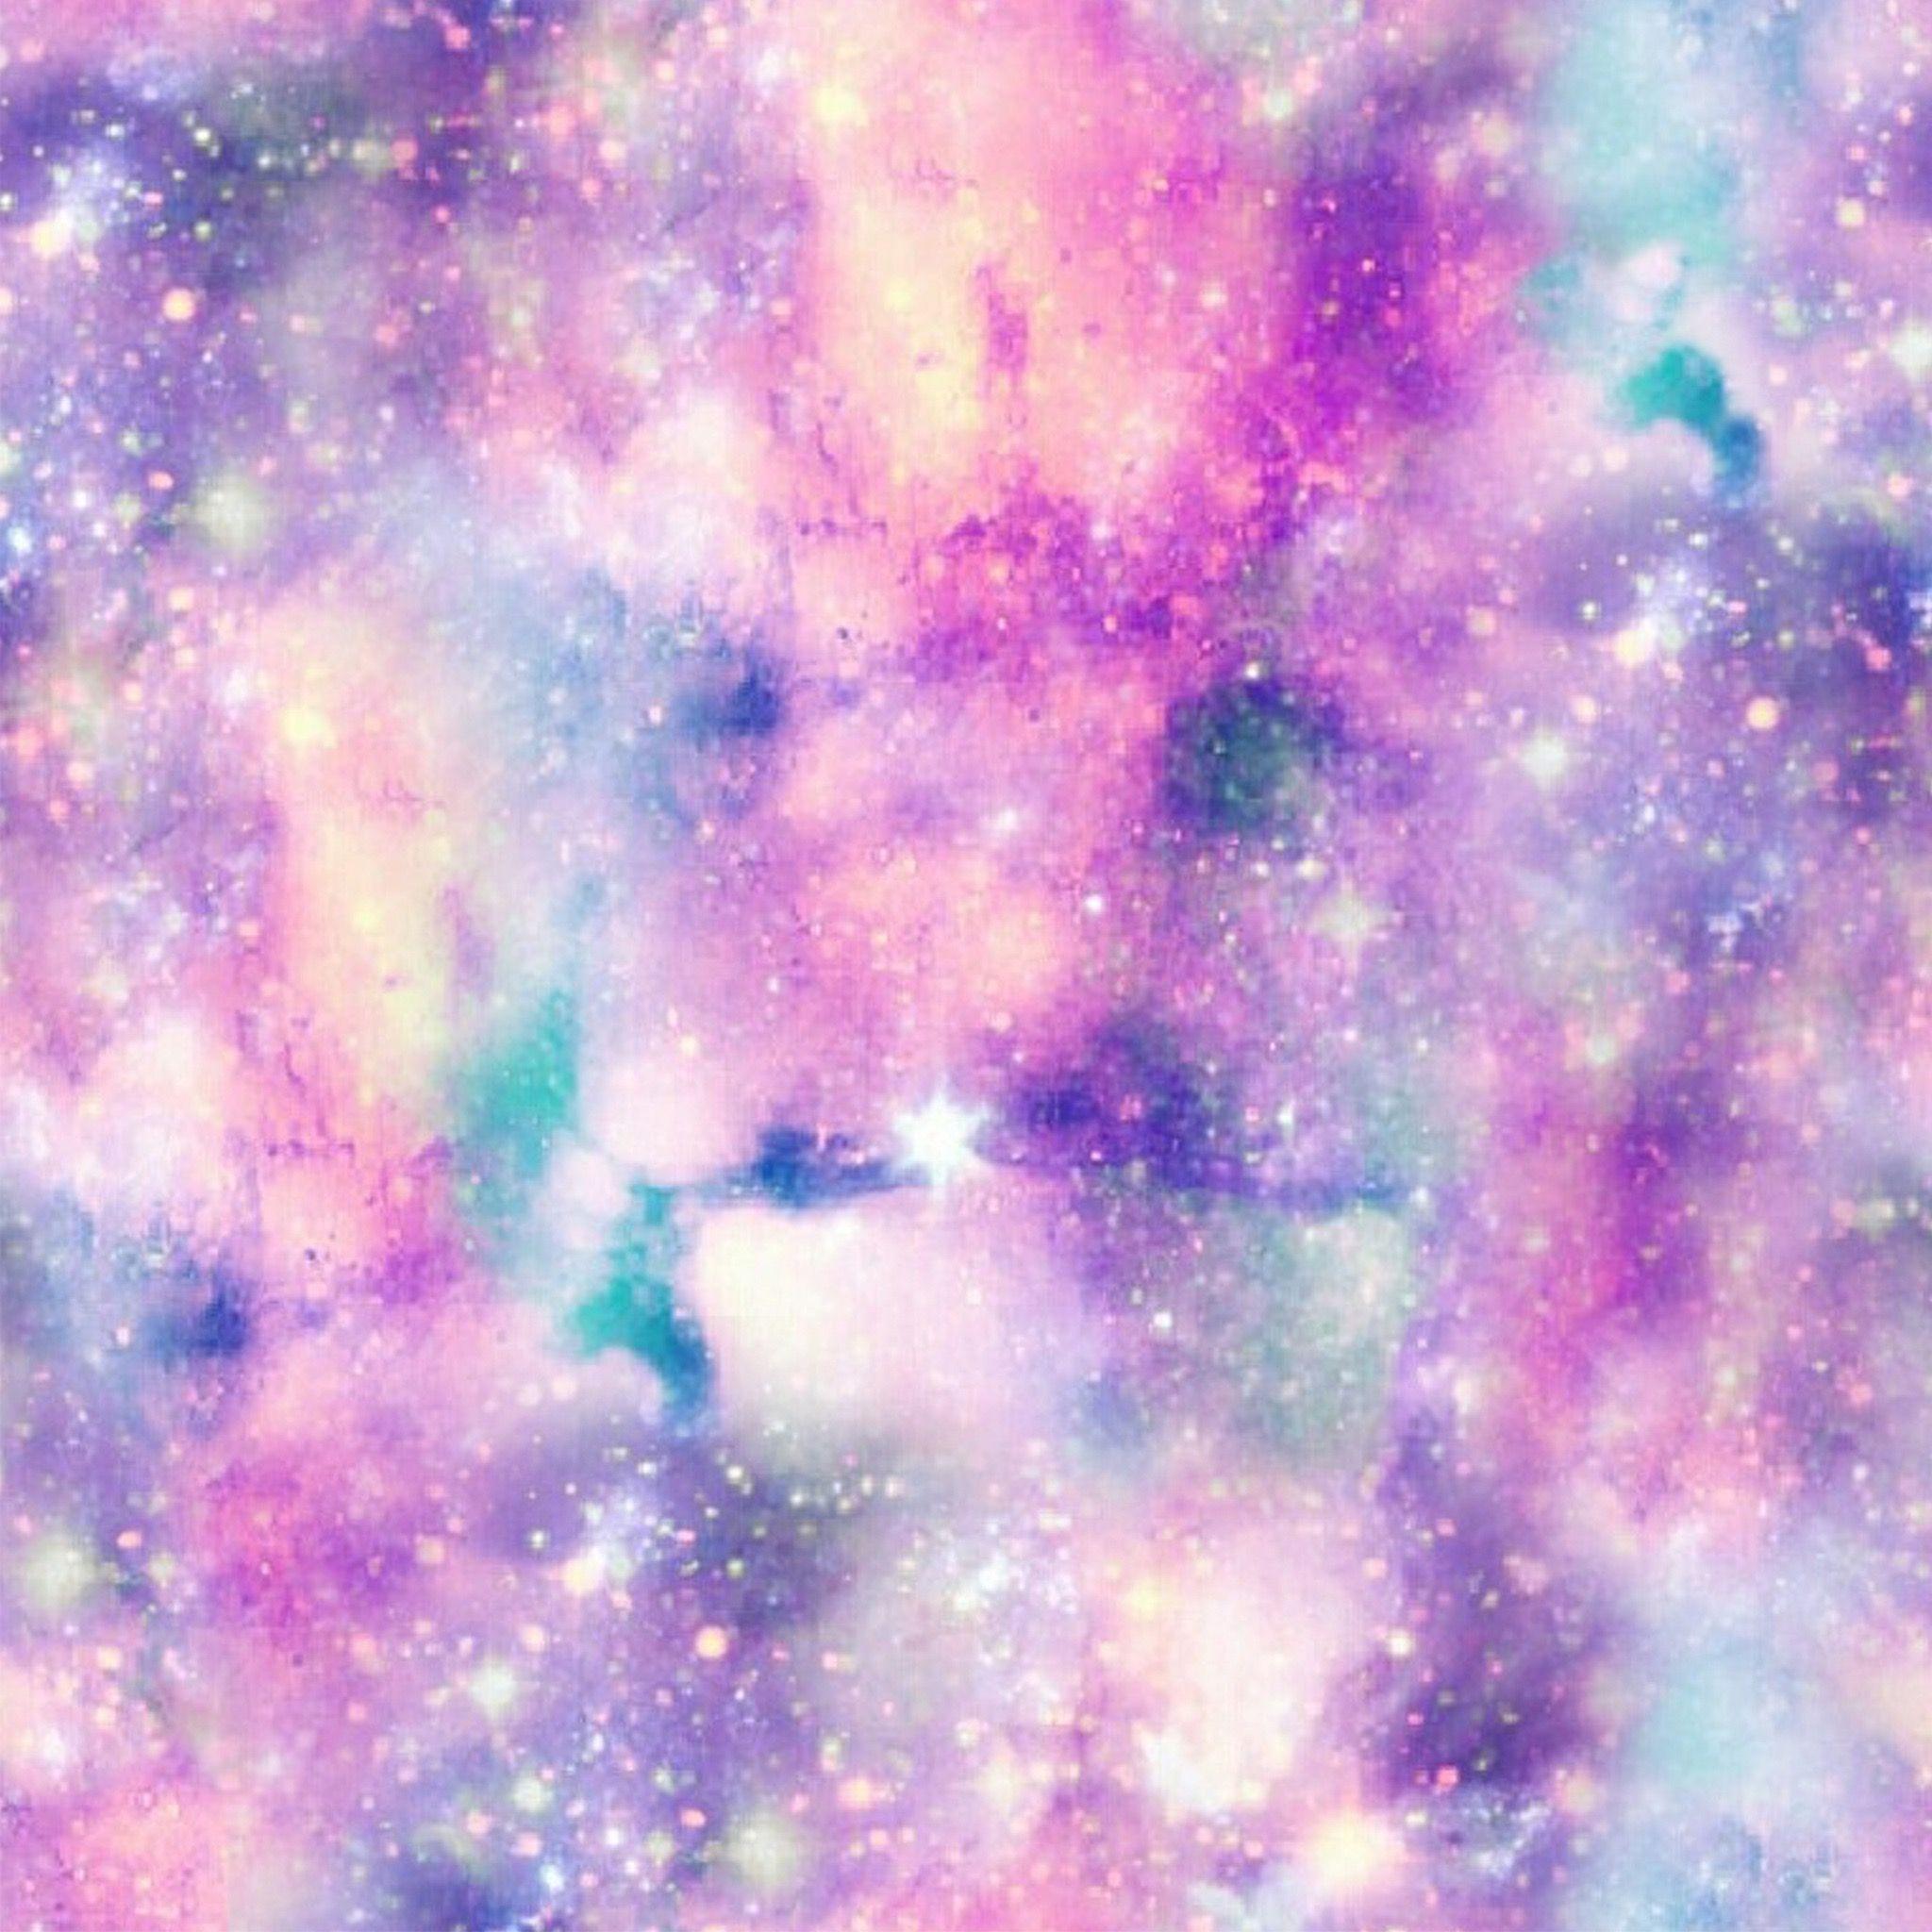 Galaxy Print Wallpapers - Top Free Galaxy Print Backgrounds